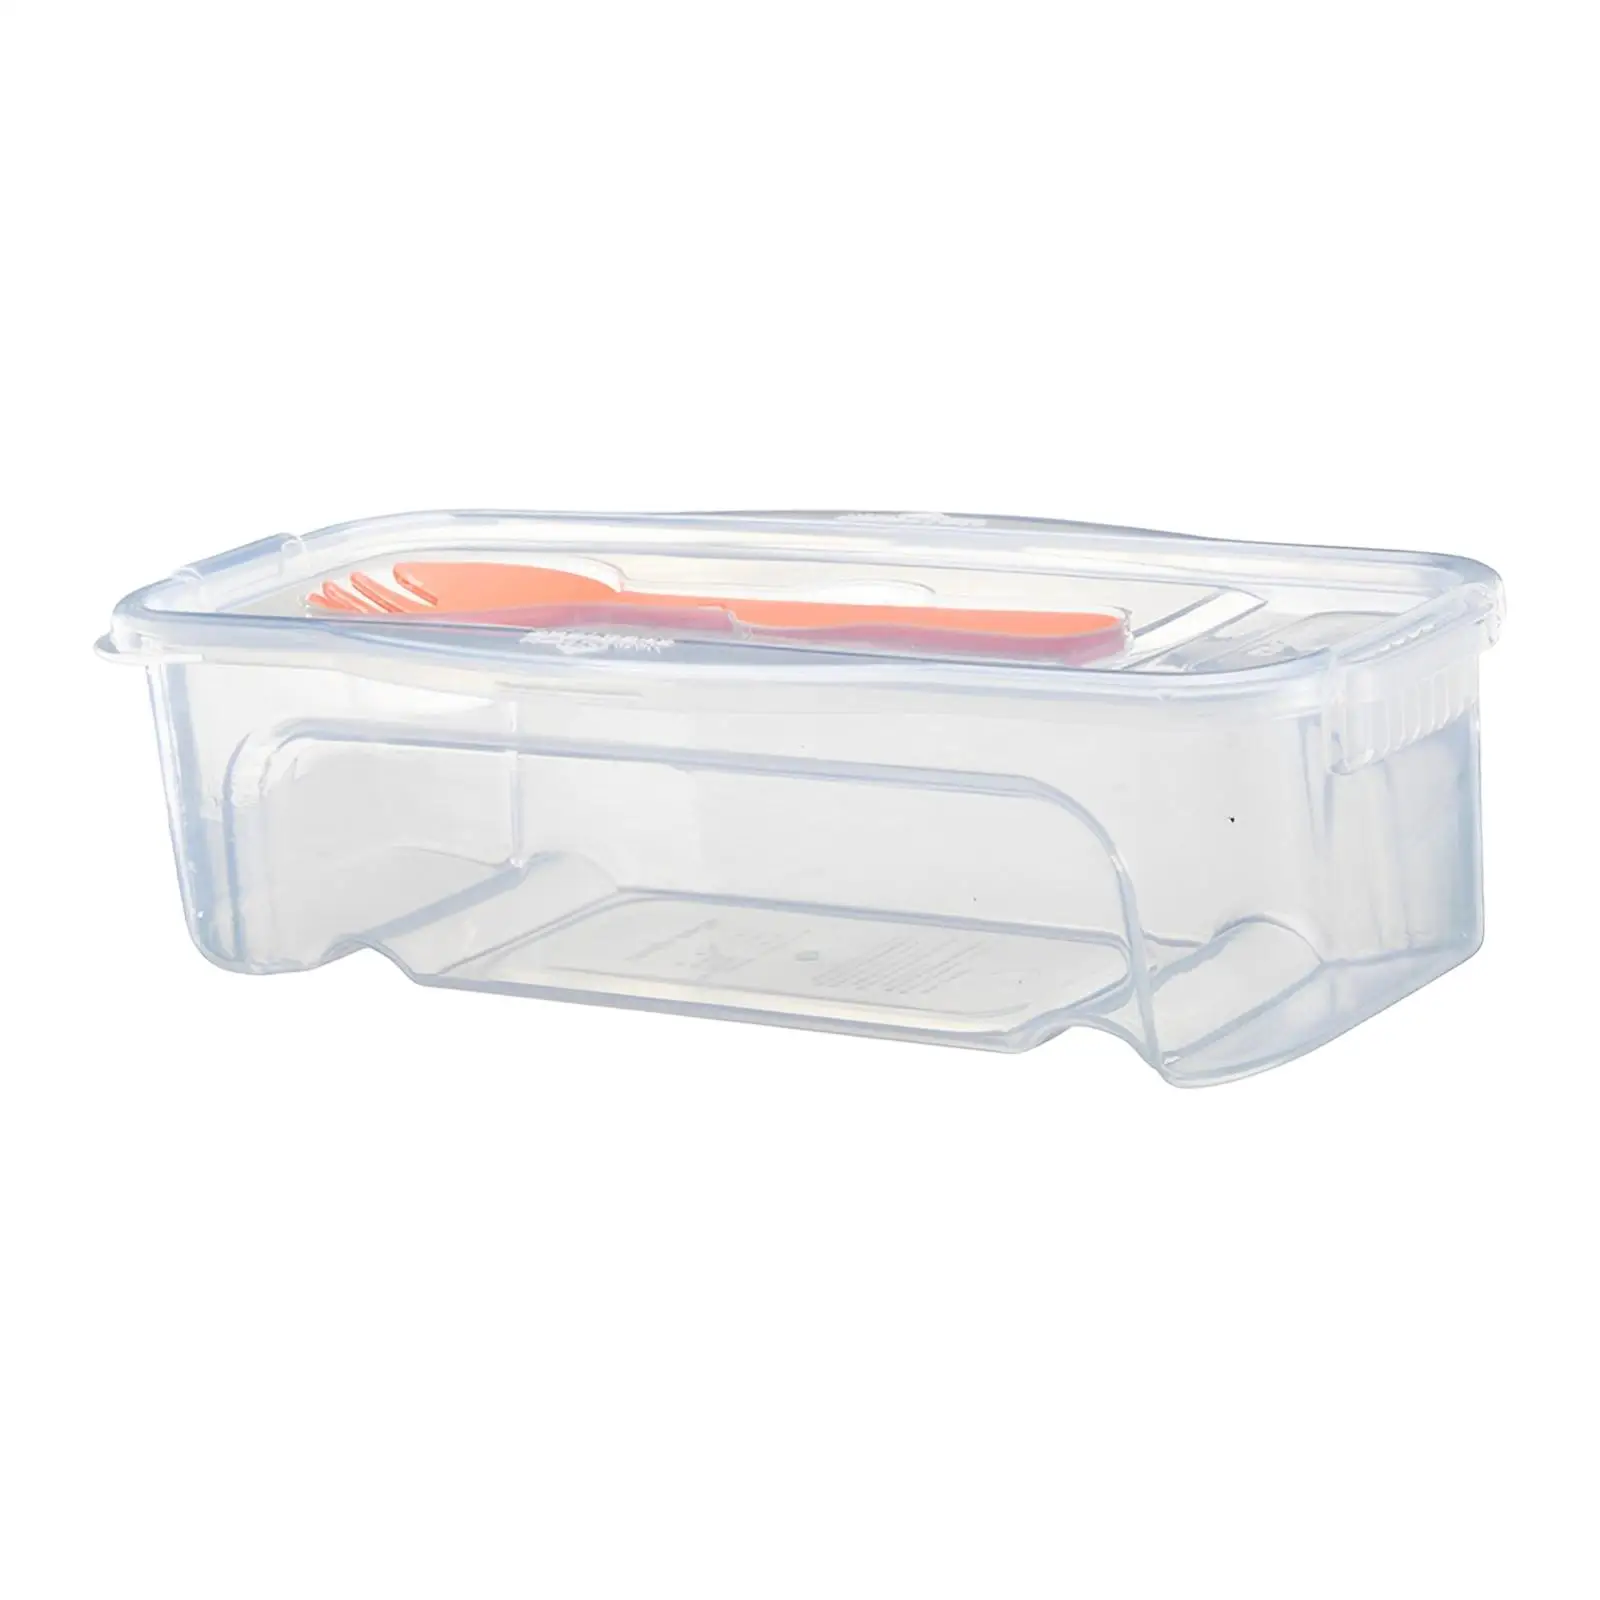 Microwave Pasta Containers Cooker Clear Stackable Food Steaming Container Spaghetti Cooker Conatiner for Dorms Personal Office